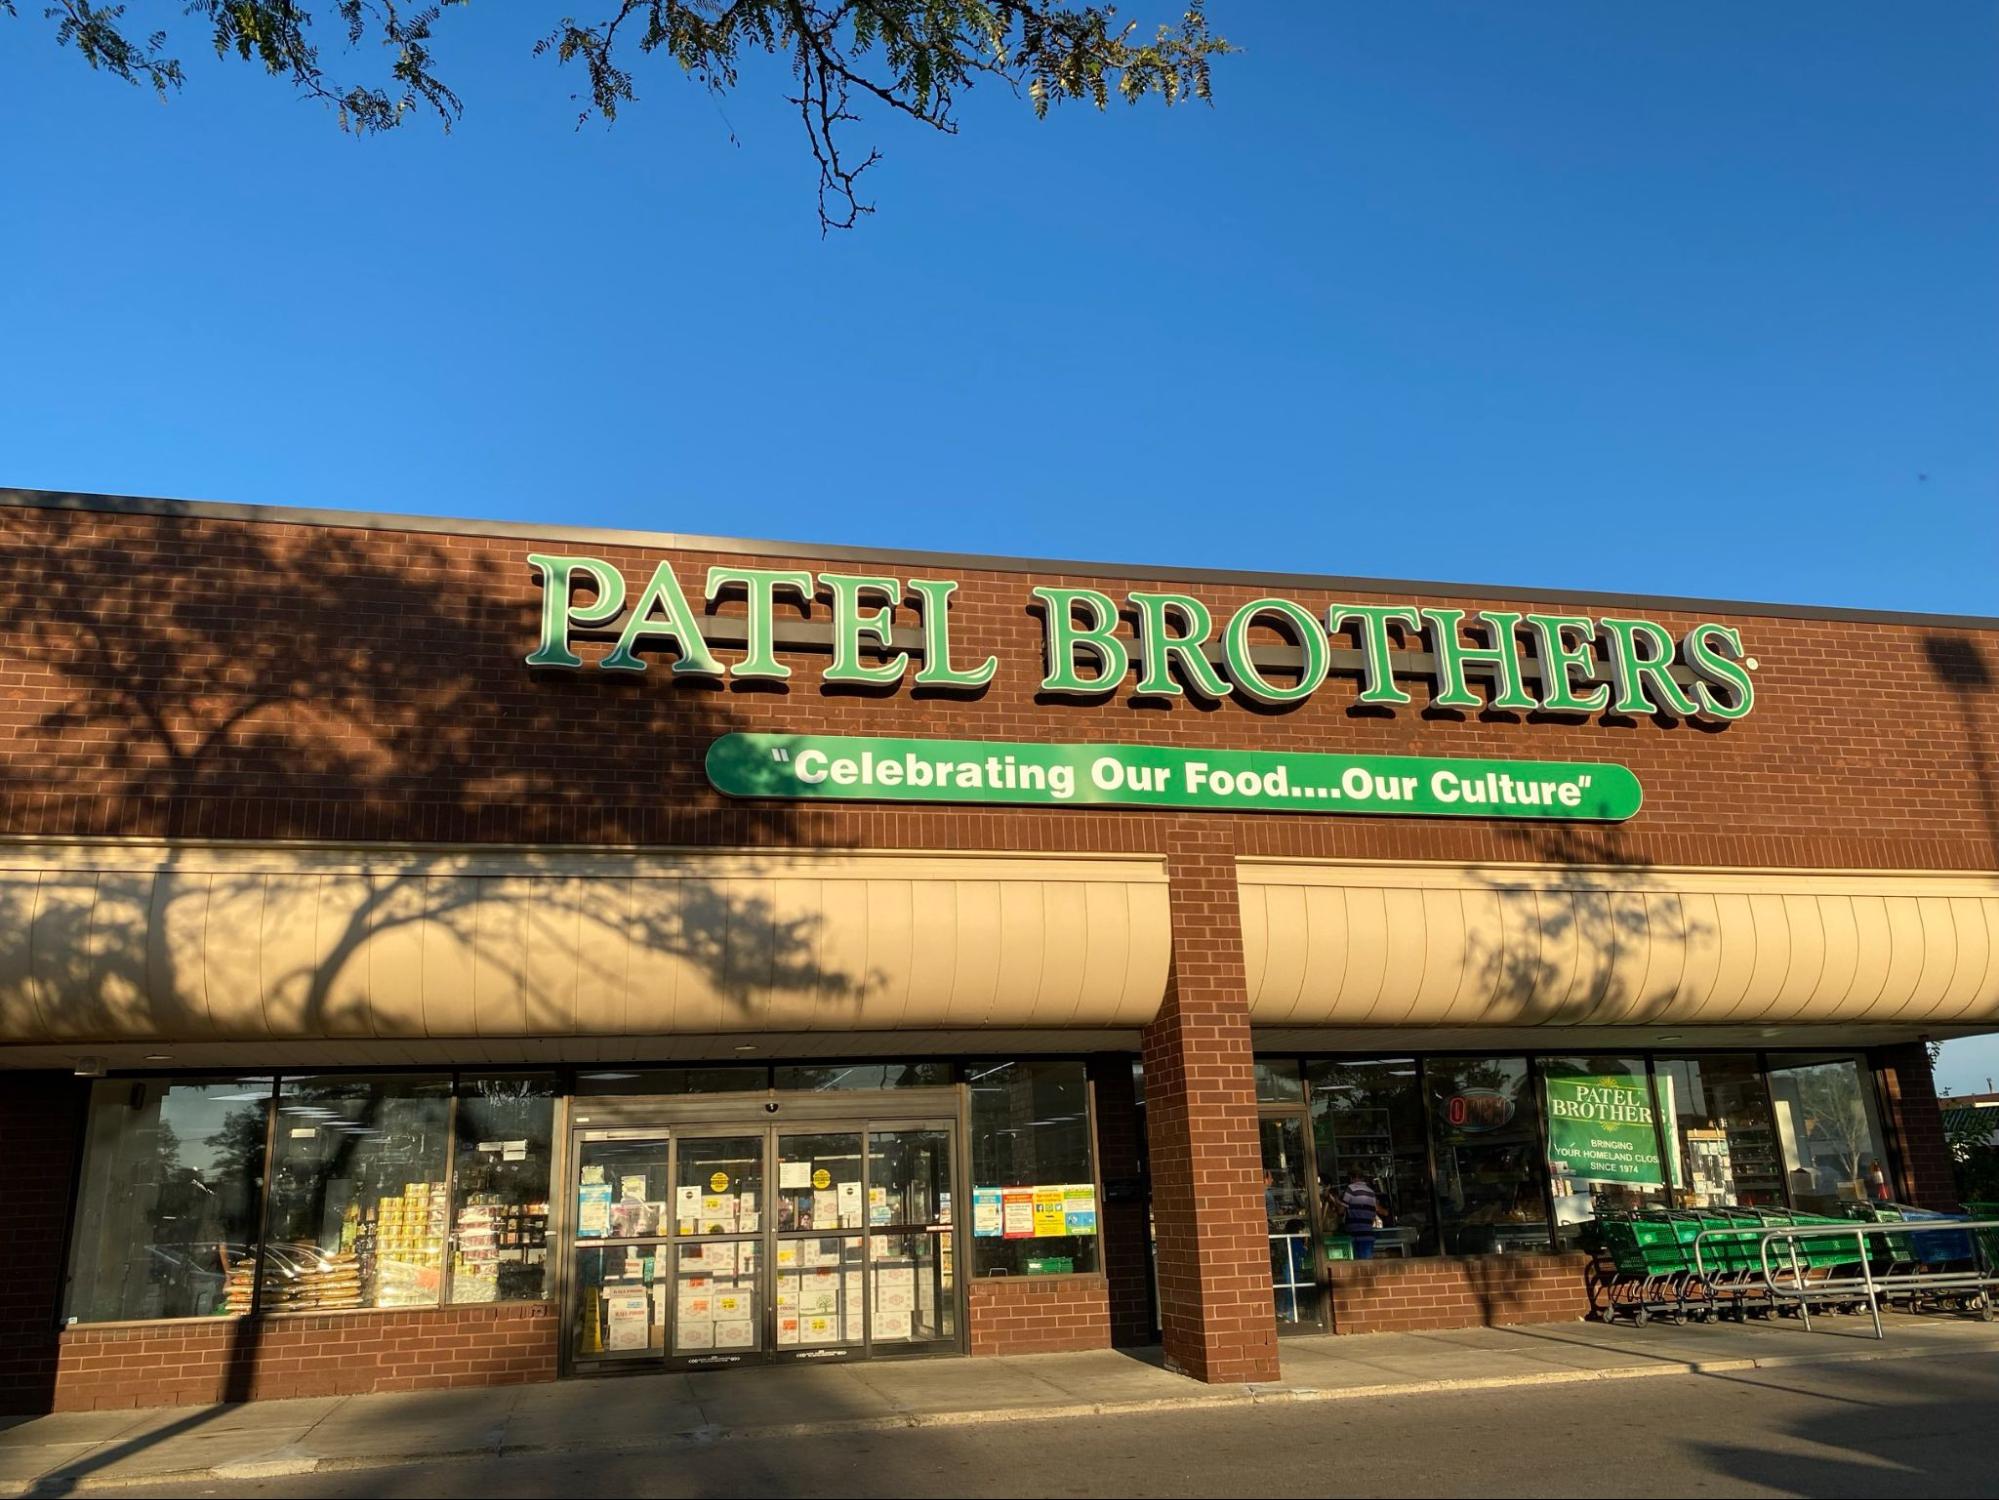 Patel Brothers, an Indian grocery store in Monroeville, Pennsylvania